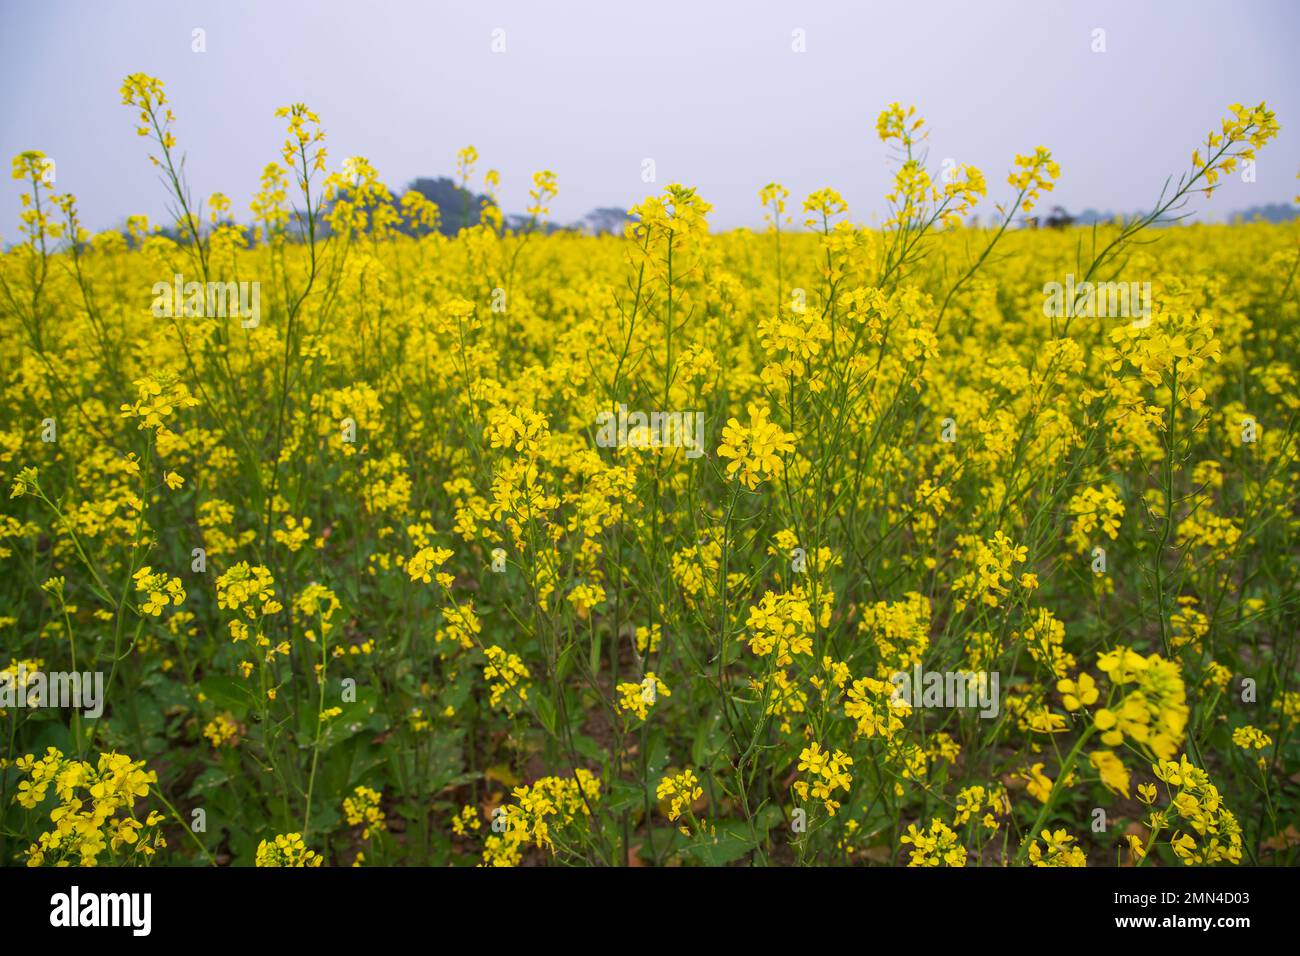 Beautiful Floral Landscape View of Rapeseed blossoms in a field in the countryside of Bangladesh Stock Photo